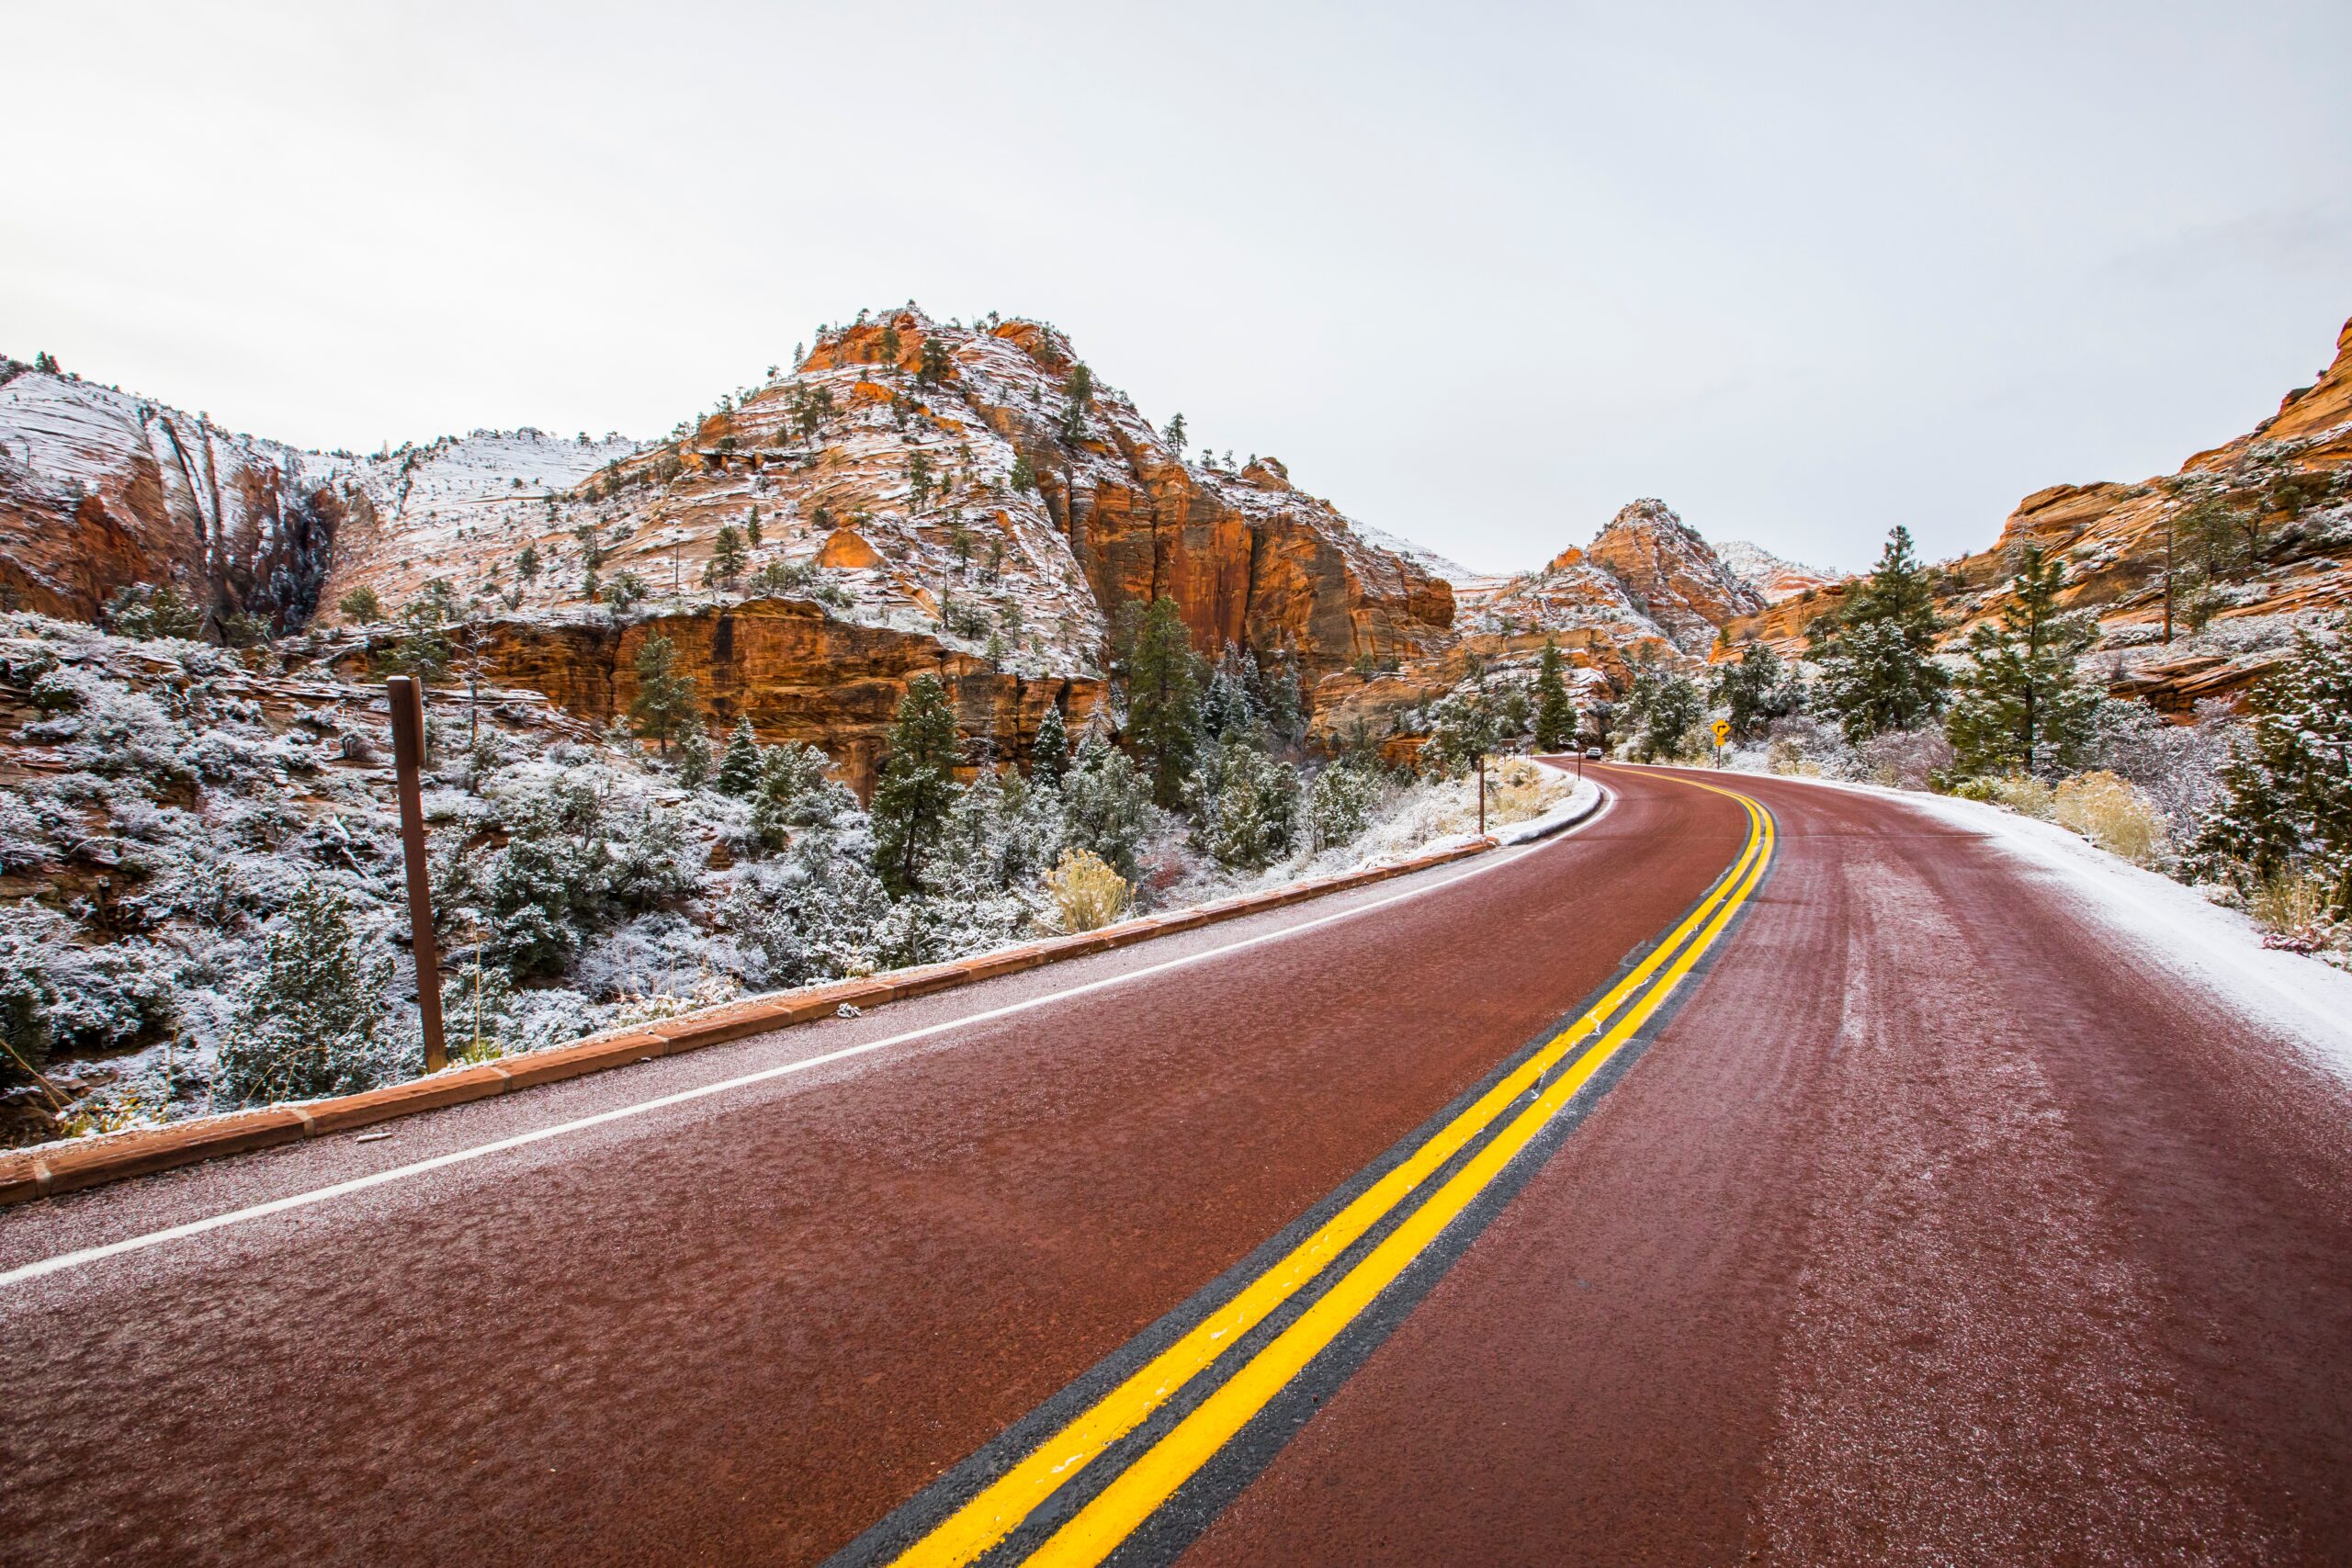 View of a red road winding through Zion National Park in the winter